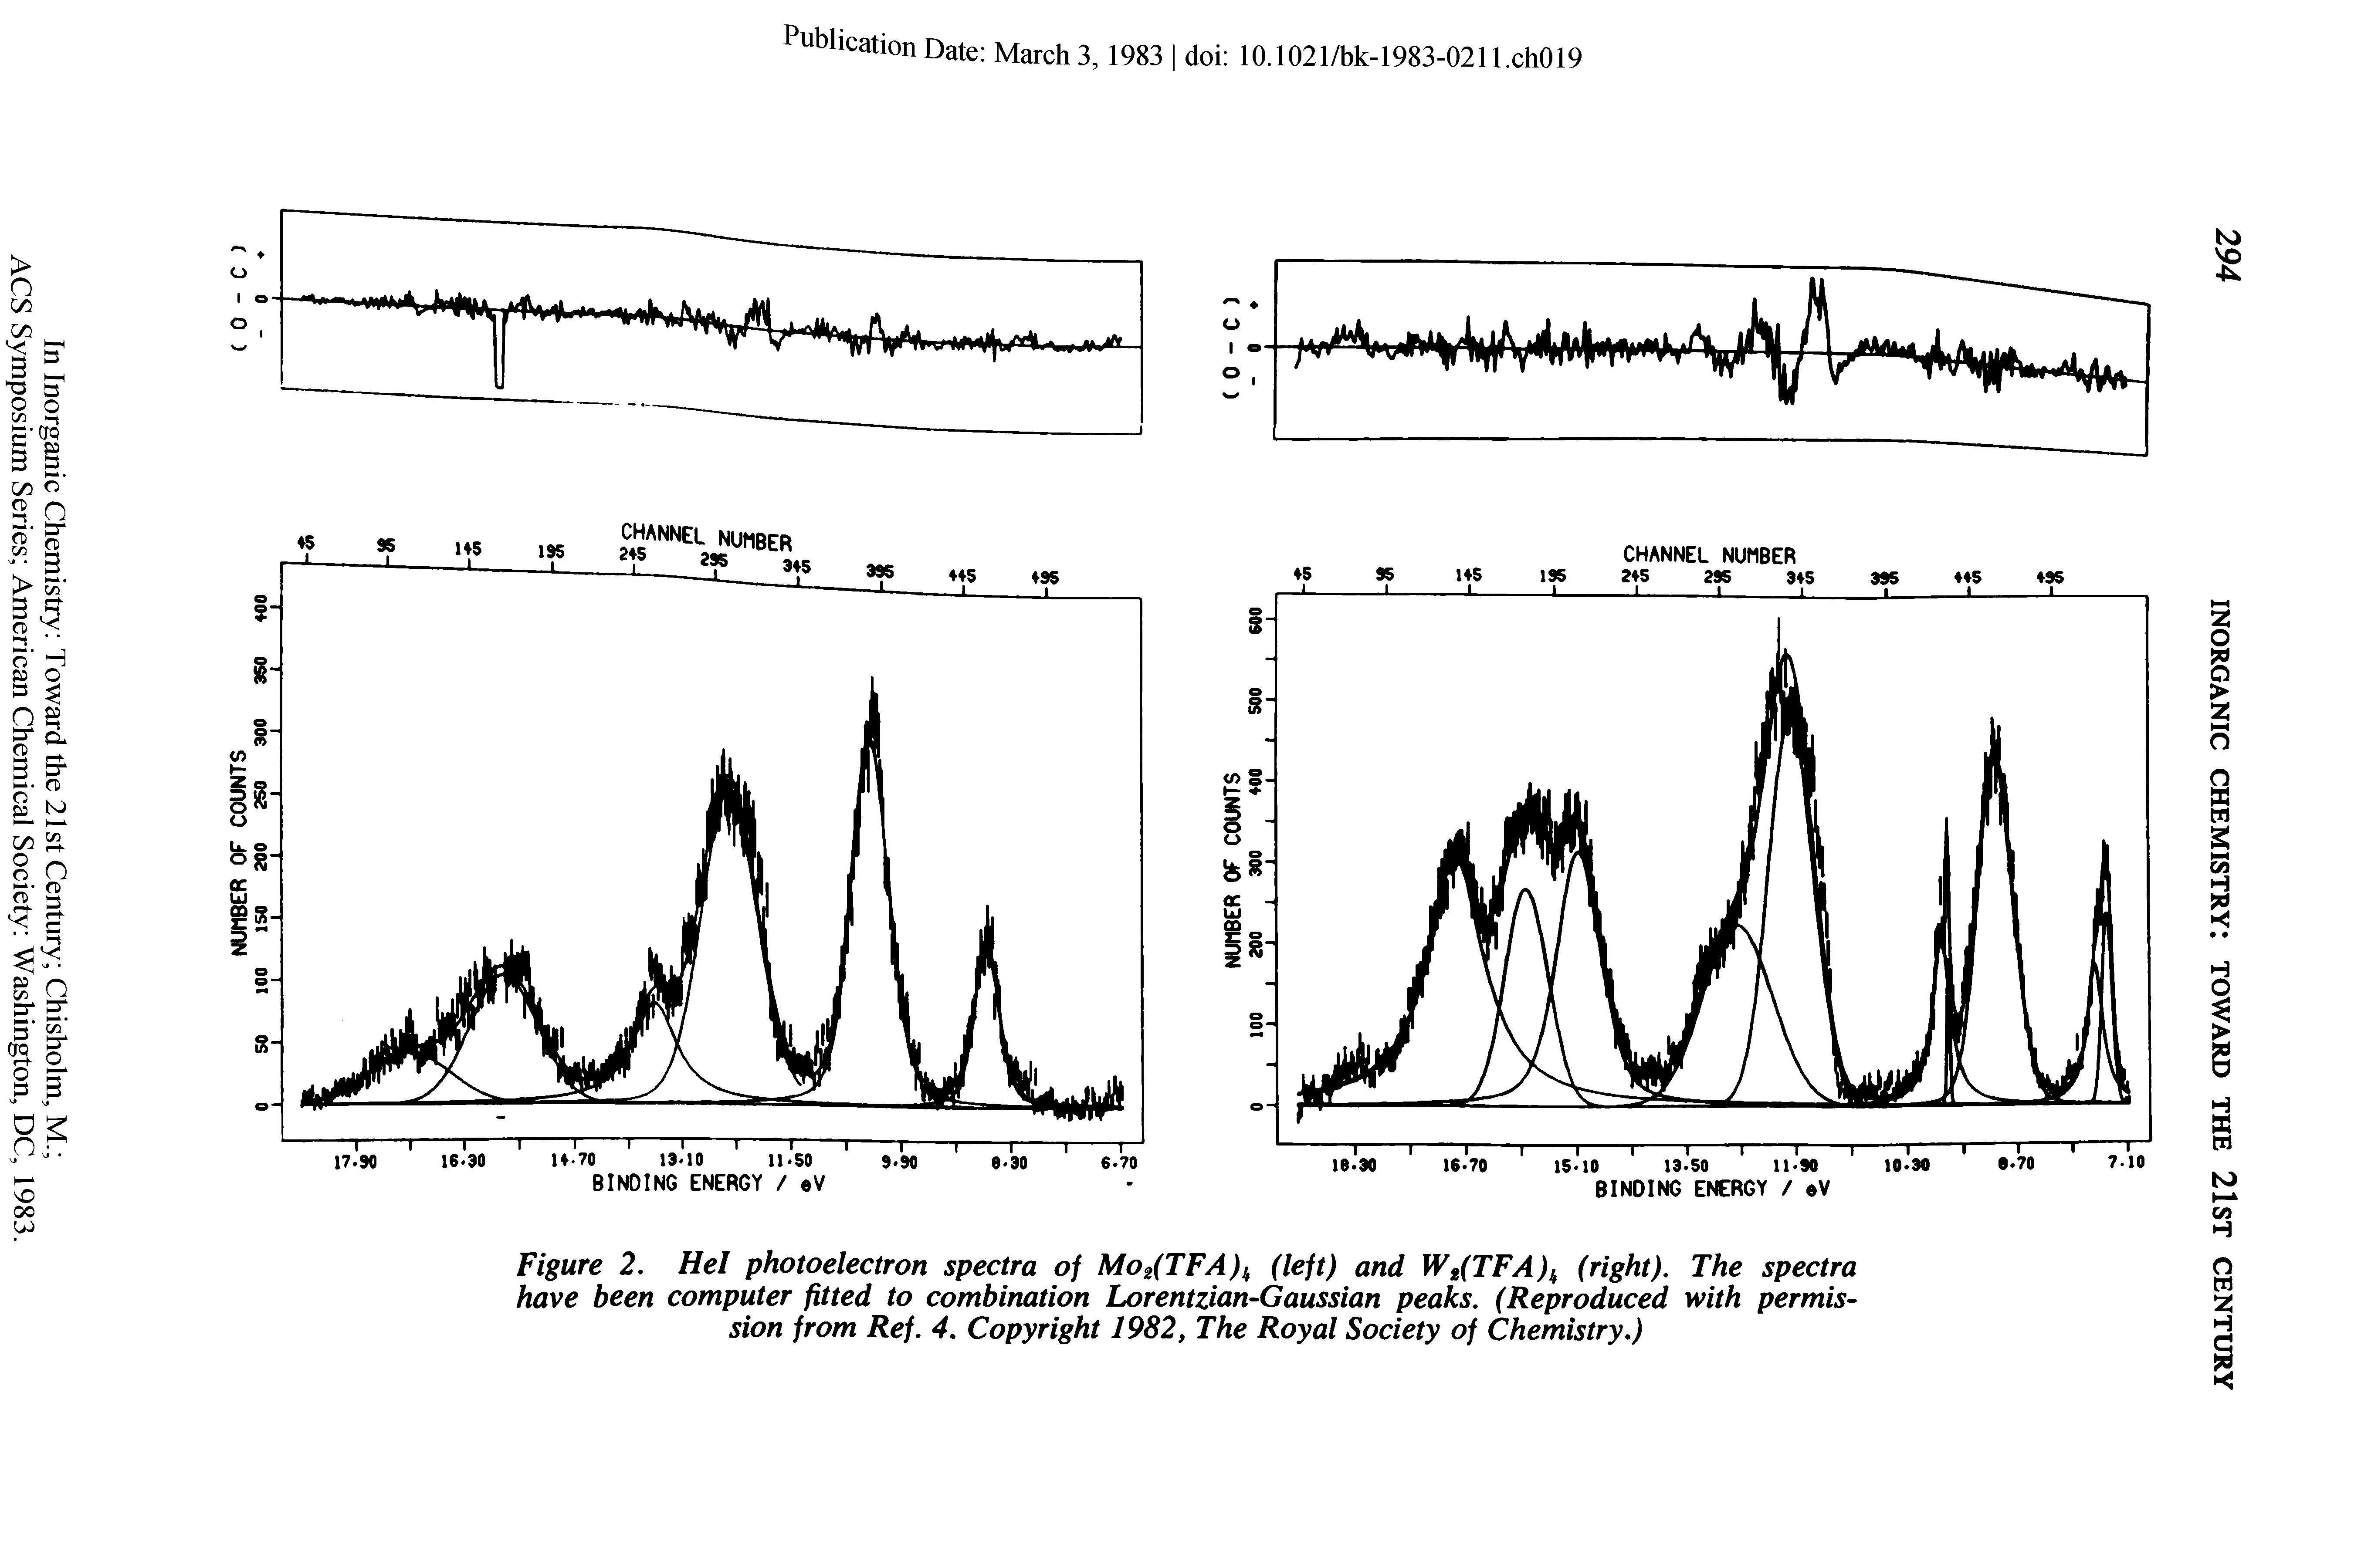 Figure 2. Hel photoelectron spectra of Mo2(TFA)k (left) and W2(TFA)k (right). The spectra have been computer fitted to combination Lorentzian-Gaussian peaks. (Reproduced with permission from Ref. 4. Copyright 1982, The Royal Society of Chemistry.)...